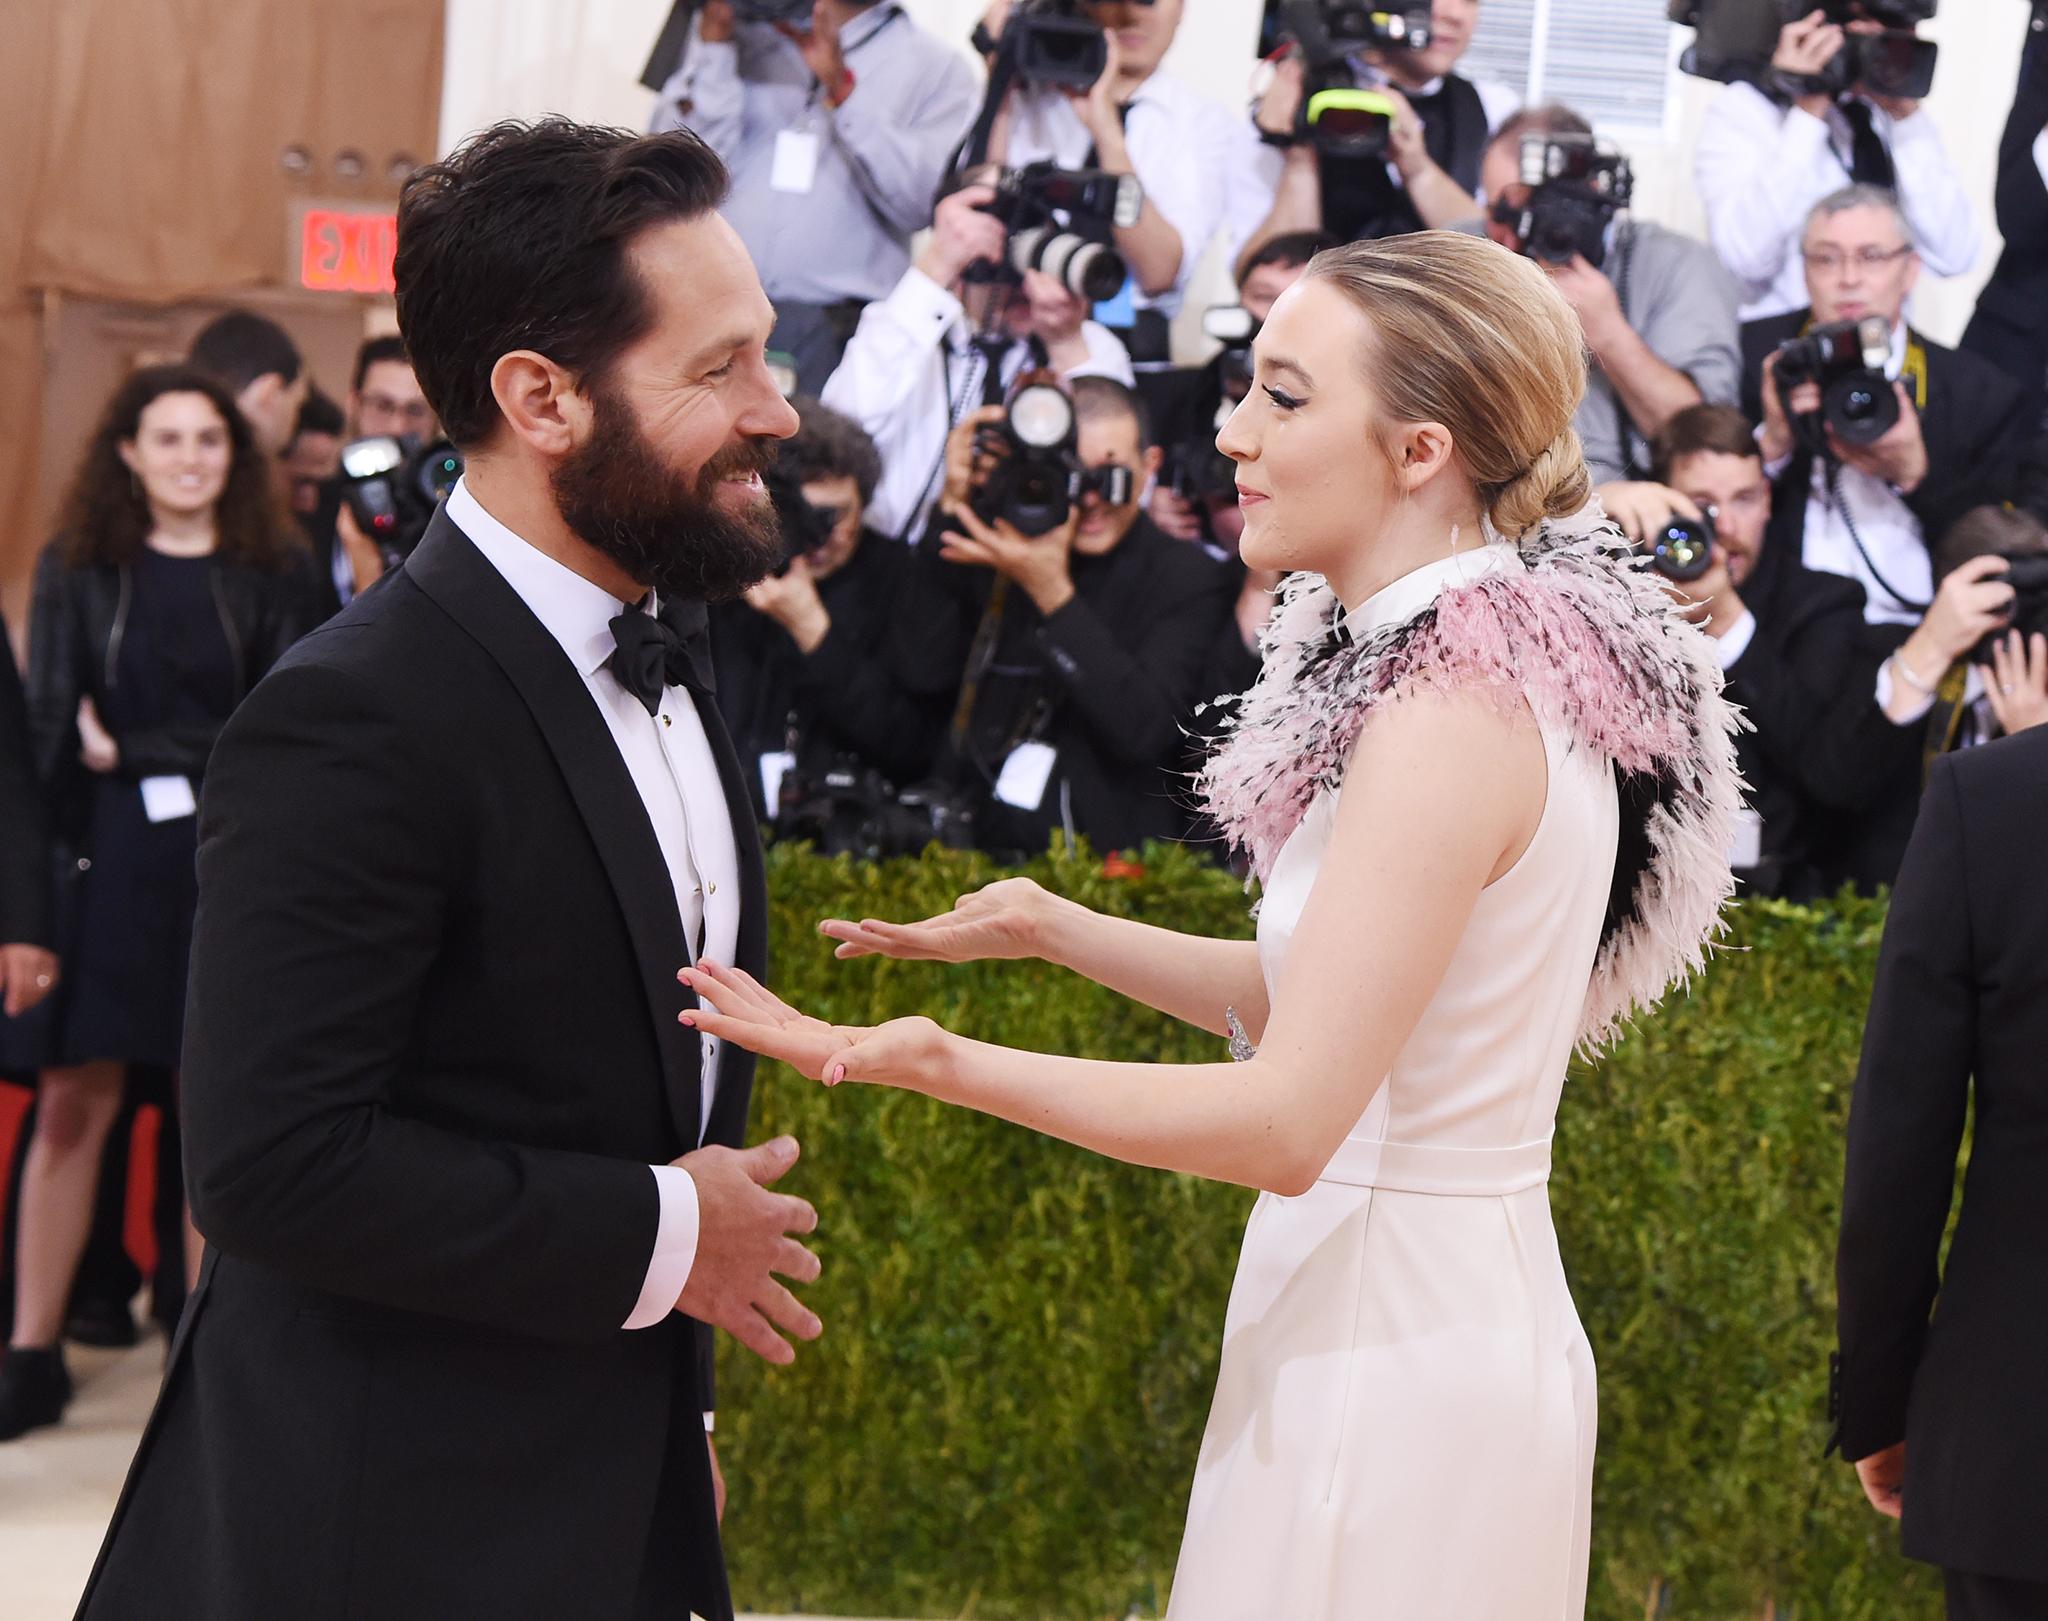 &#13;
Paul Rudd catches up with Saoirse Ronan at the 2016 Met Gala &#13;